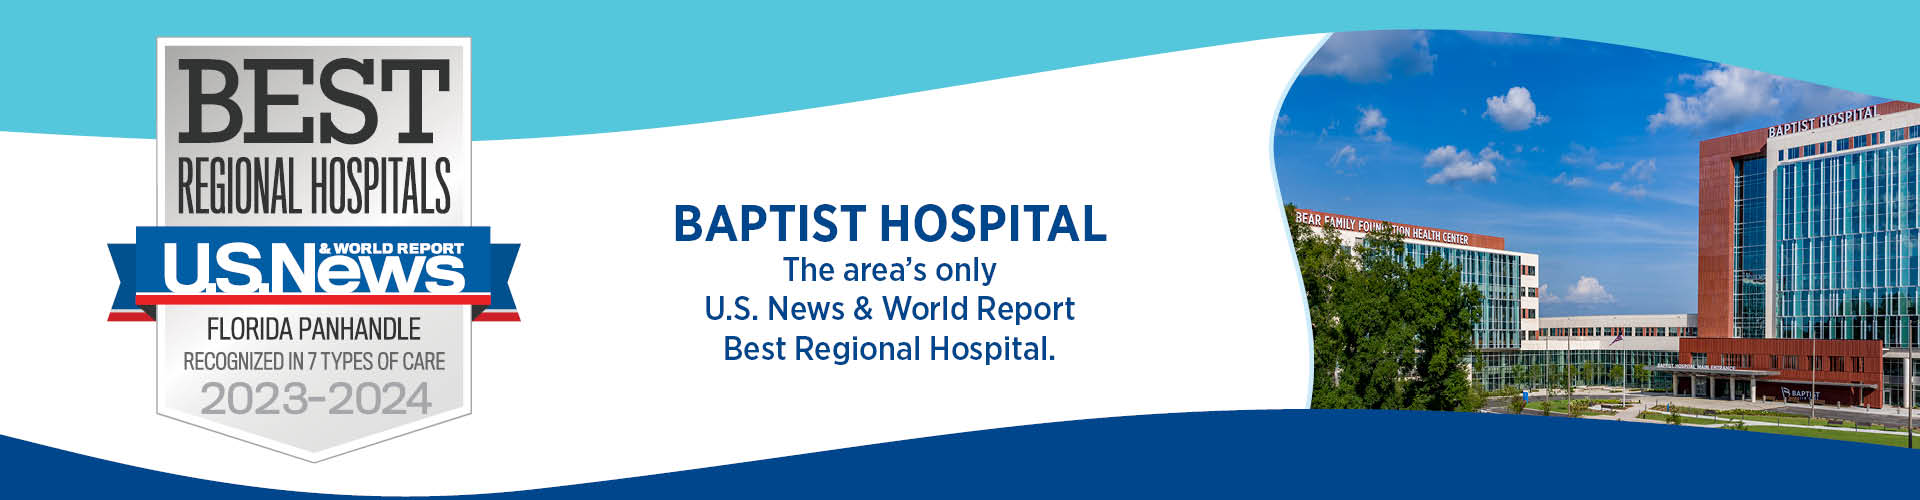 Baptist Hospital - The area's only US News and World Report Best Regional Hospital